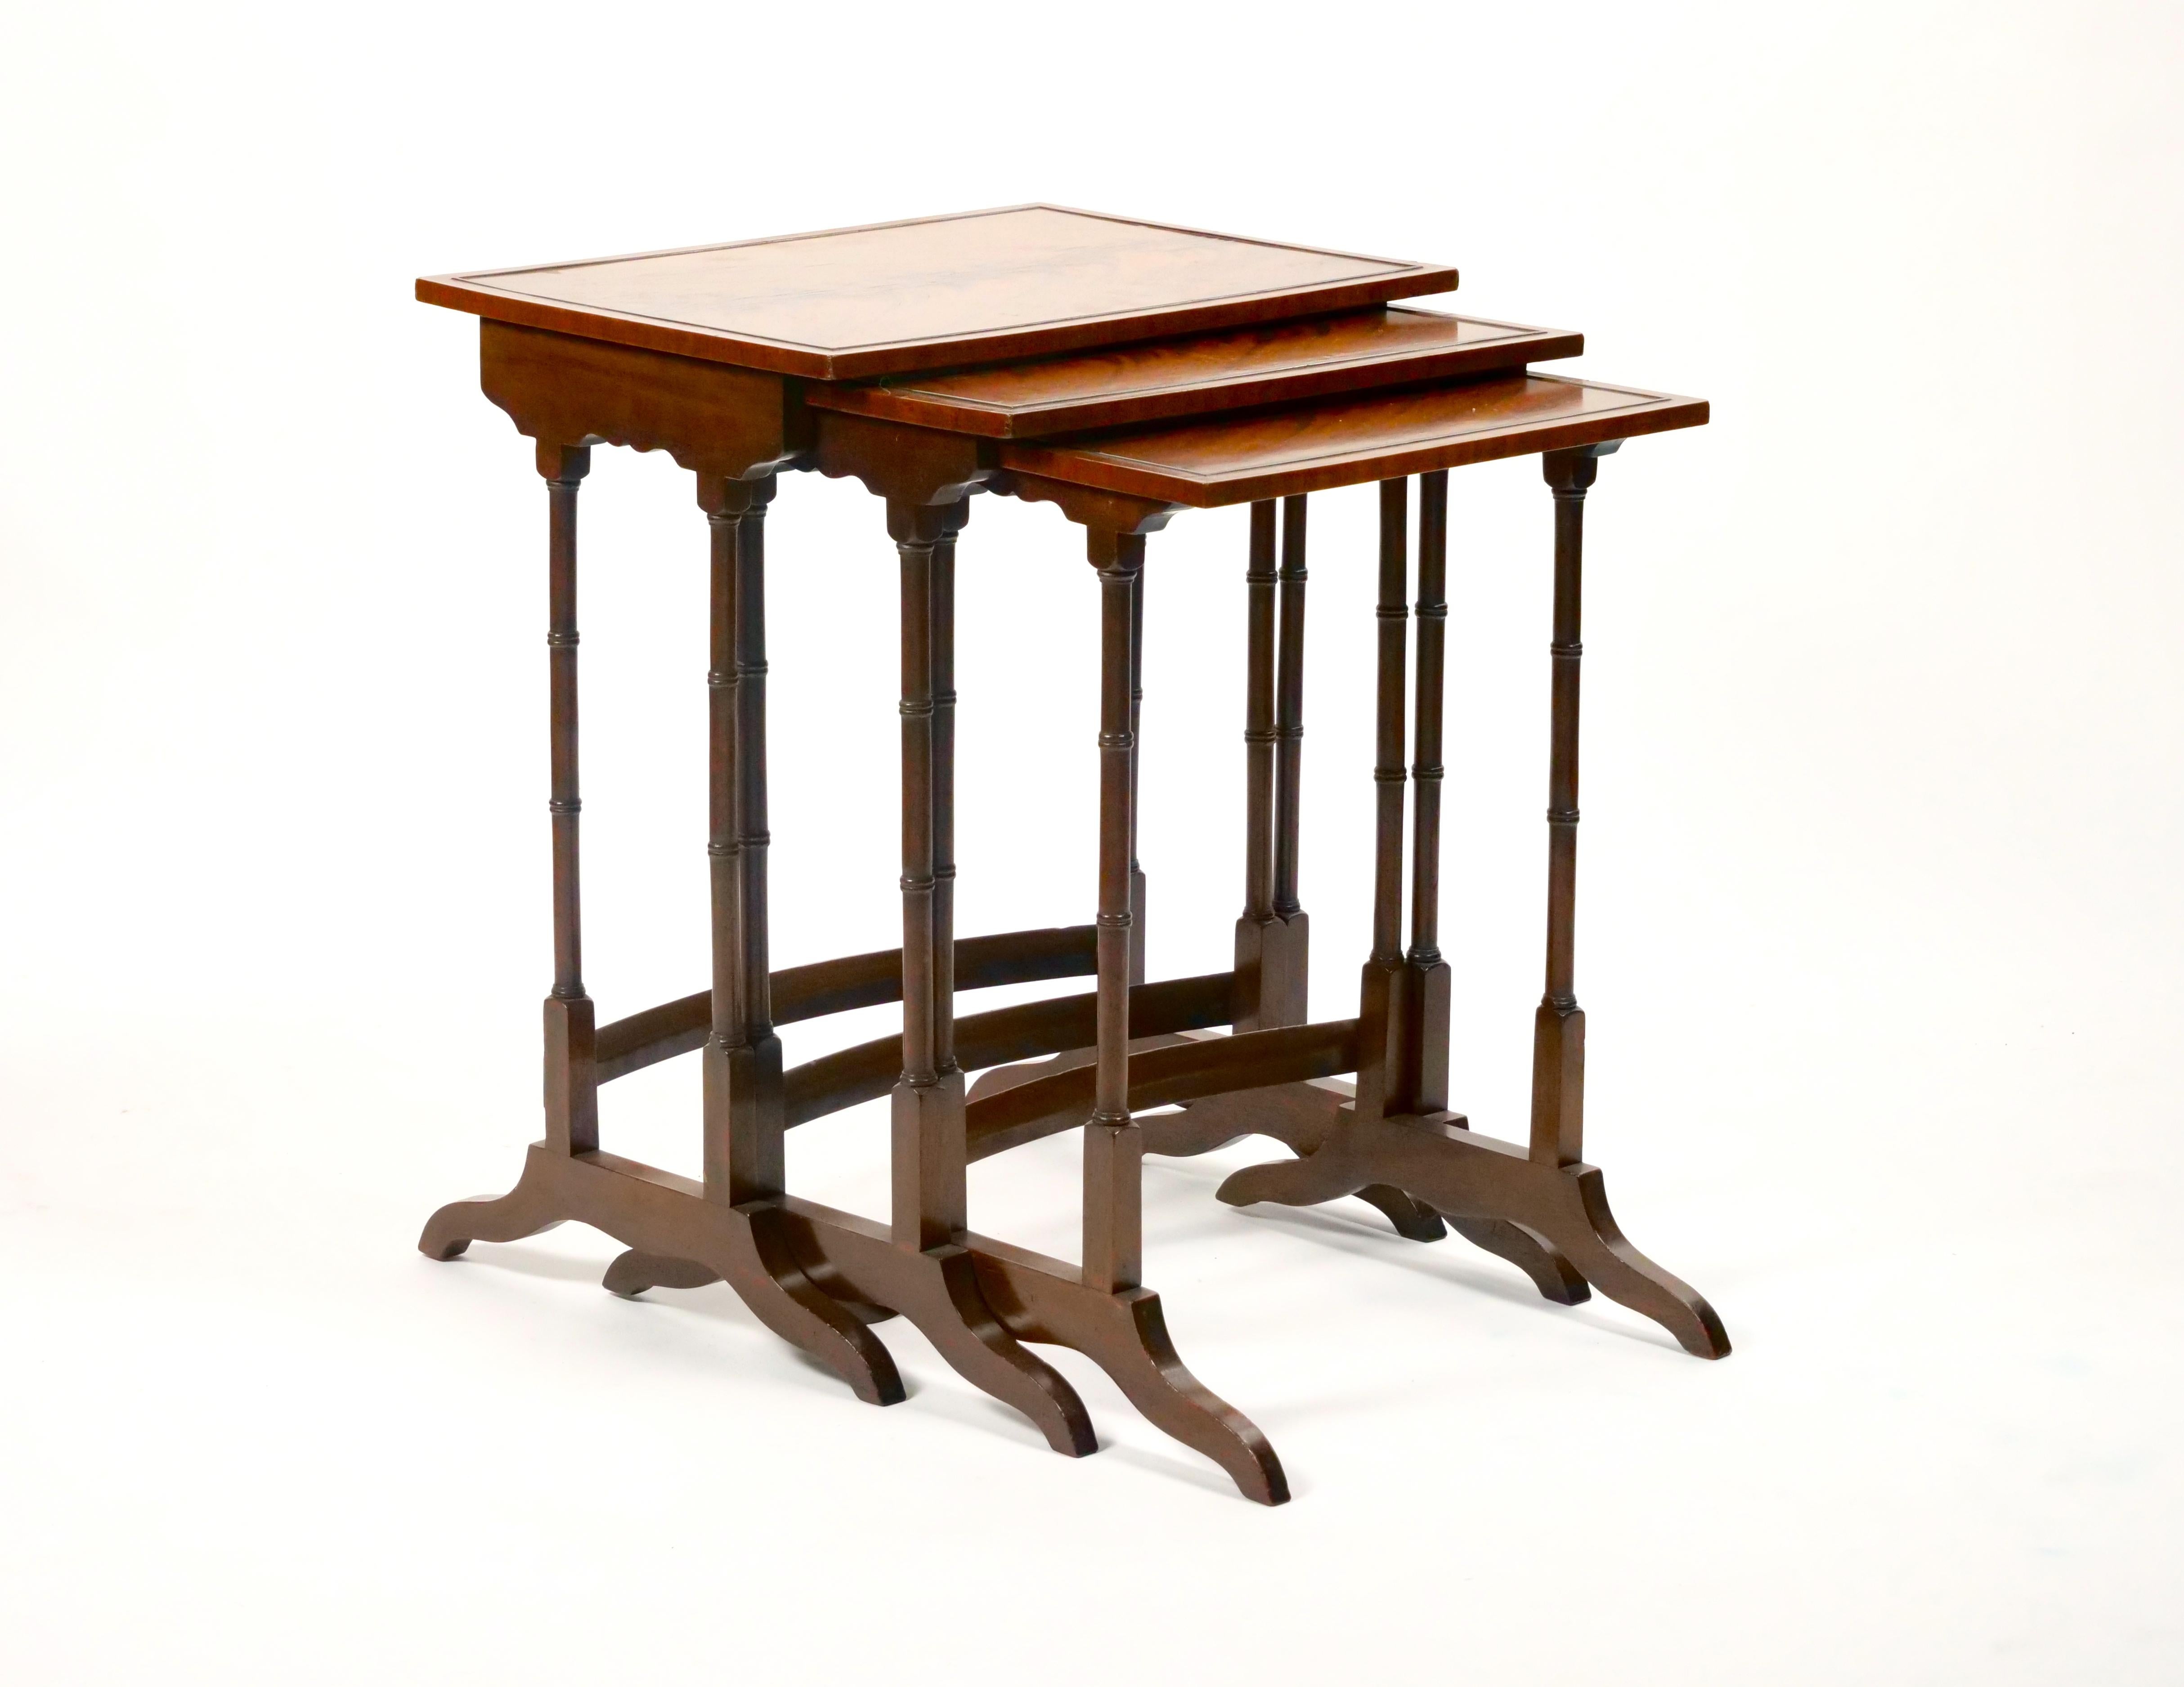 Enhance your living space with this set of 19th Century English Burl Mahogany Wood Stacking Tables, a charming and versatile addition to your home decor.
The burl mahogany wood inlaid tops add character and depth to the design, creating a sense of